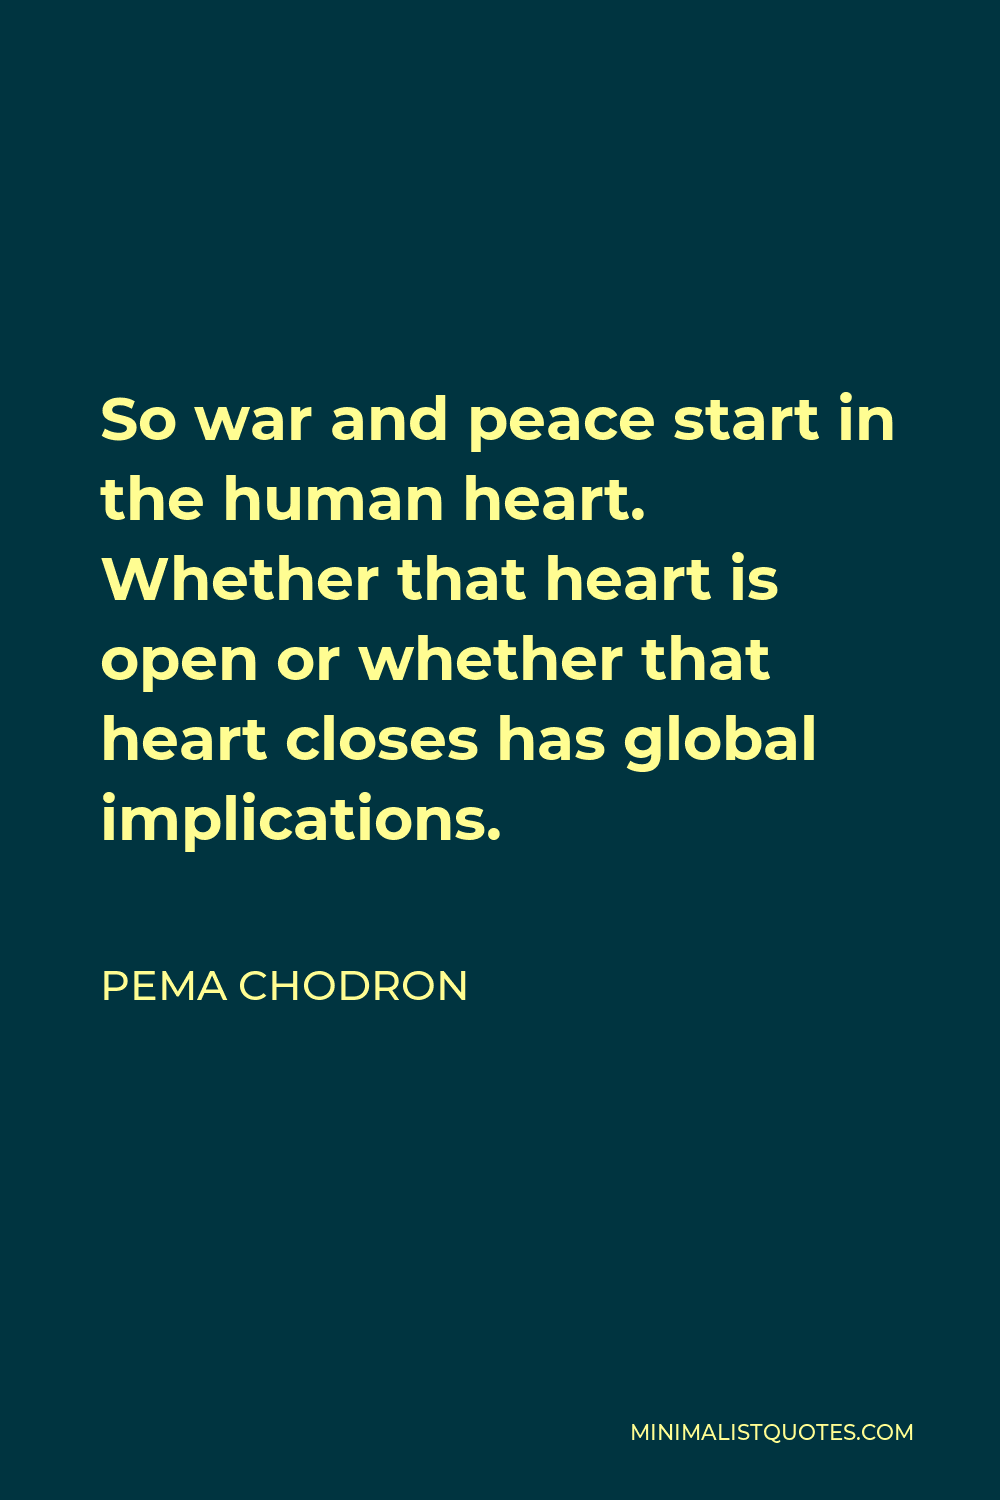 Pema Chodron Quote - So war and peace start in the human heart. Whether that heart is open or whether that heart closes has global implications.